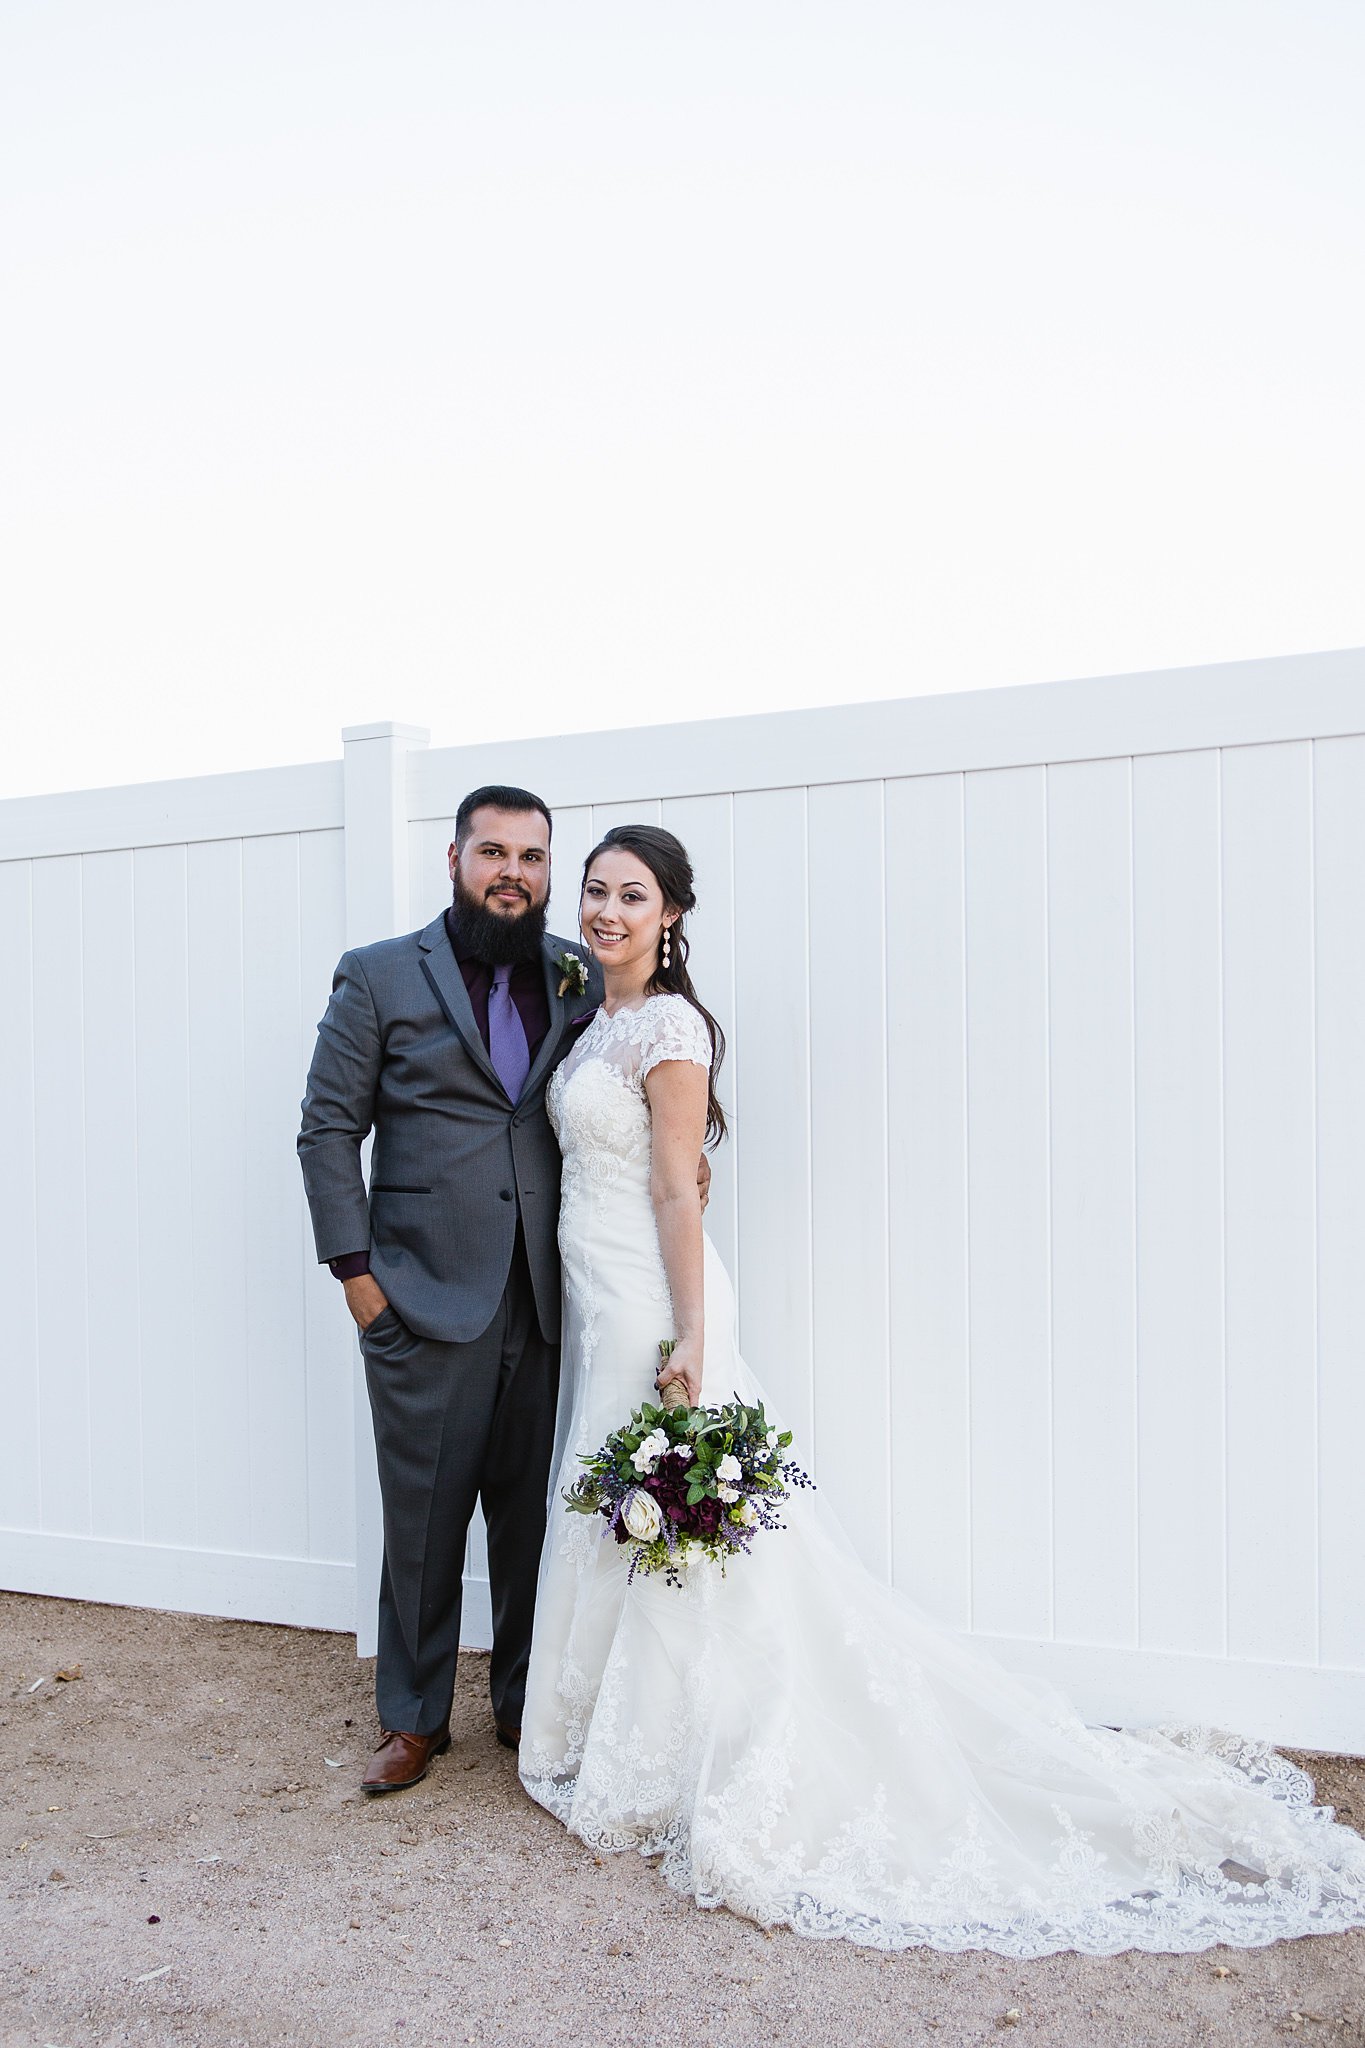 Bride and groom pose in front of white wall for their grey and purple rustic chic wedding at Schnepf Farms Farmhouse by PMA Photography. 